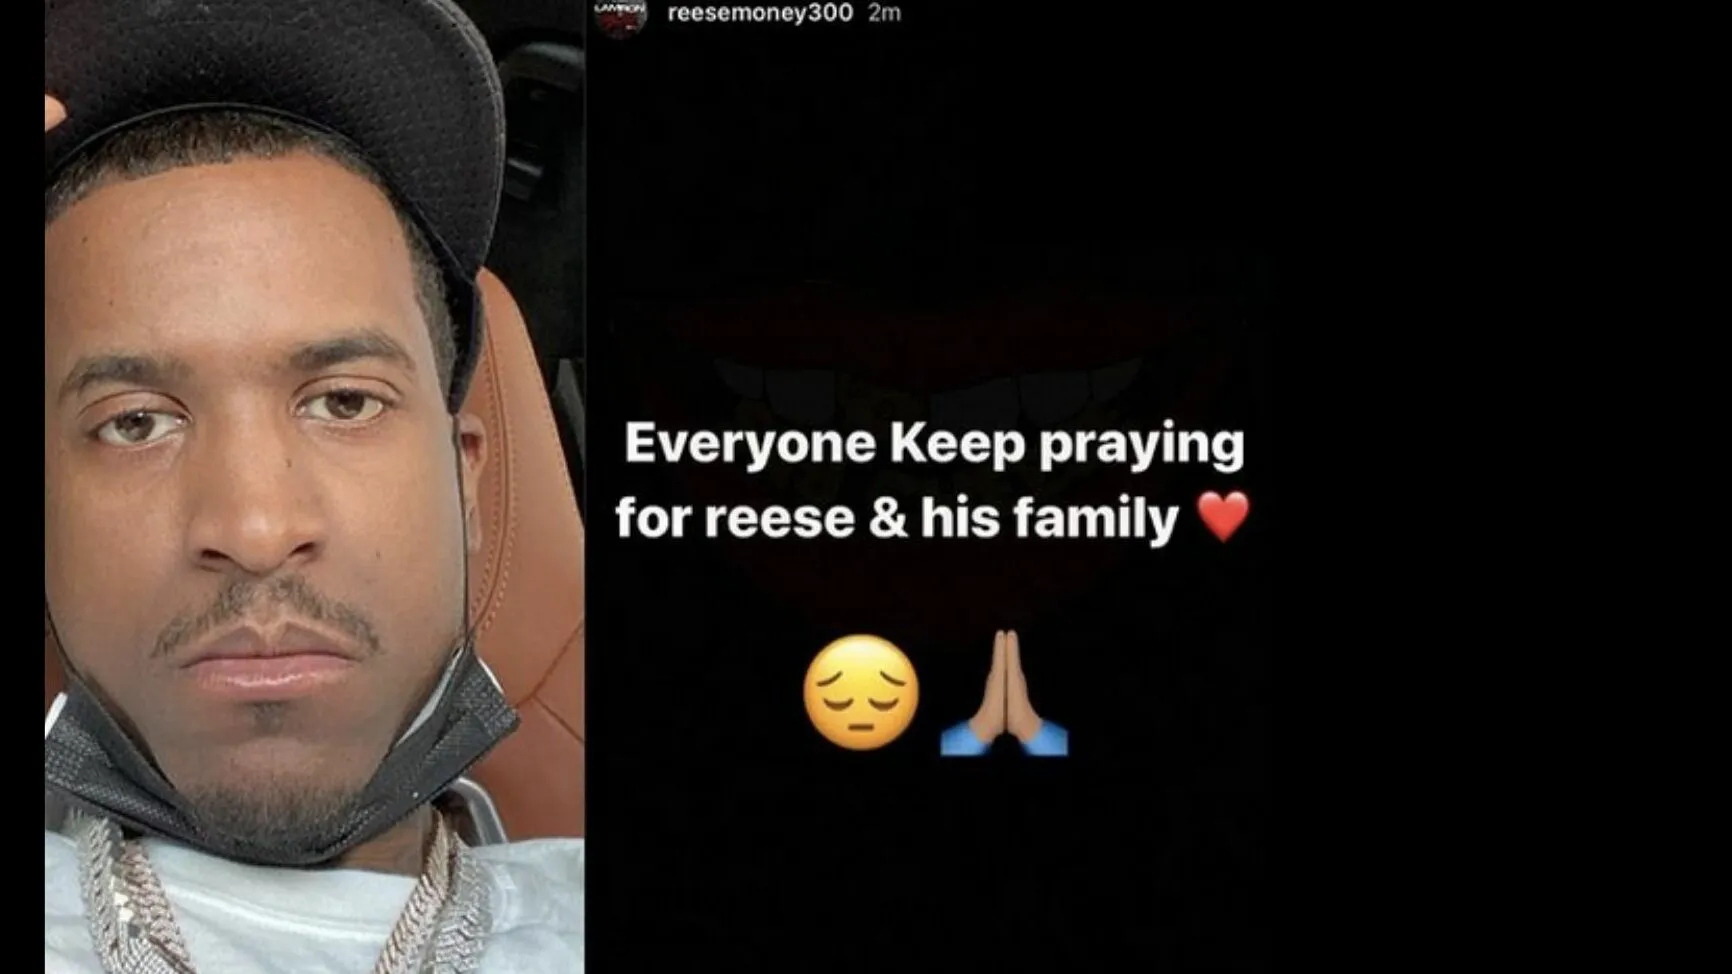 Chicago Rapper Lil Reese Shot and Manager Asks for Prayers